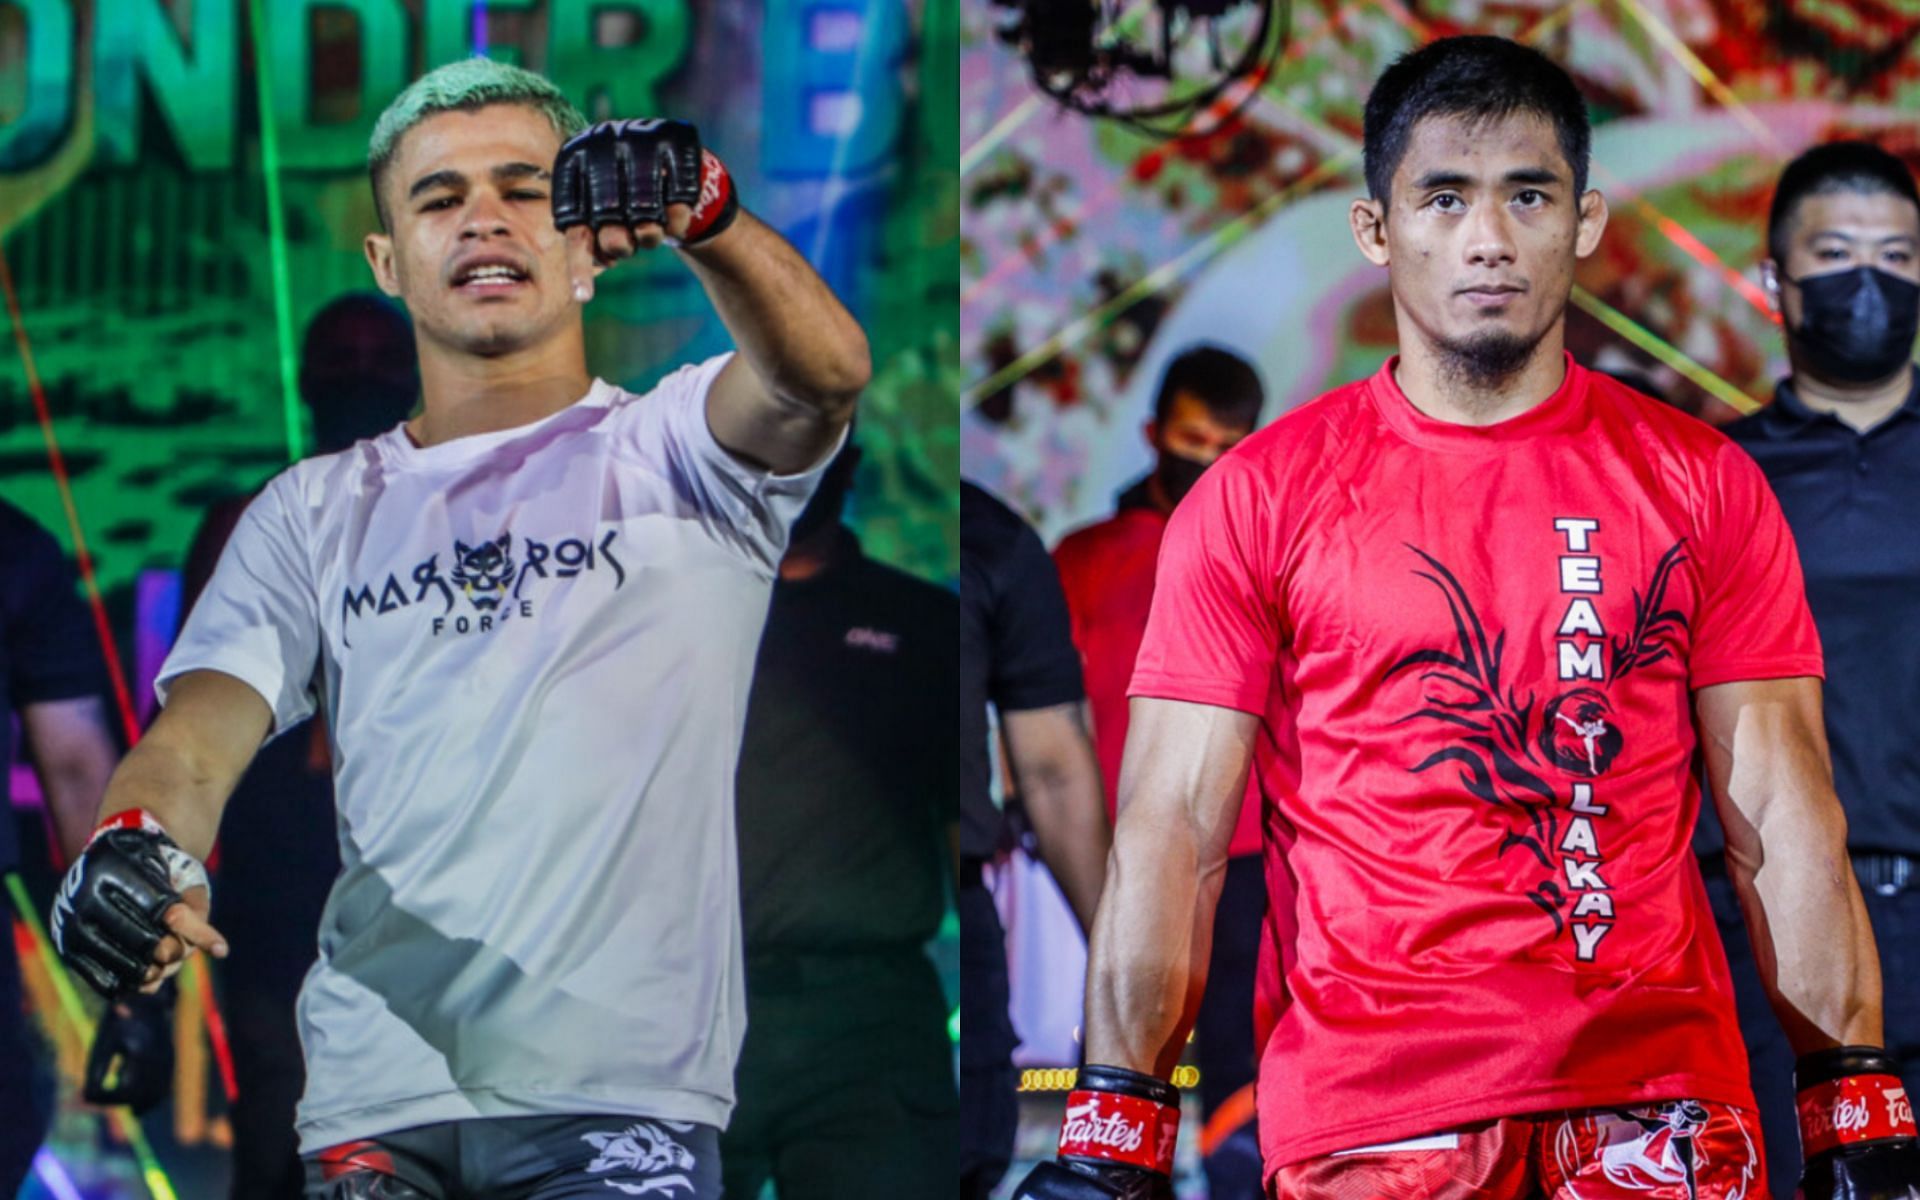 Fabricio Andrade (left) says he will knock Stephen Loman (right) out if they ever fight in ONE Championship. [Photos ONE Championship]